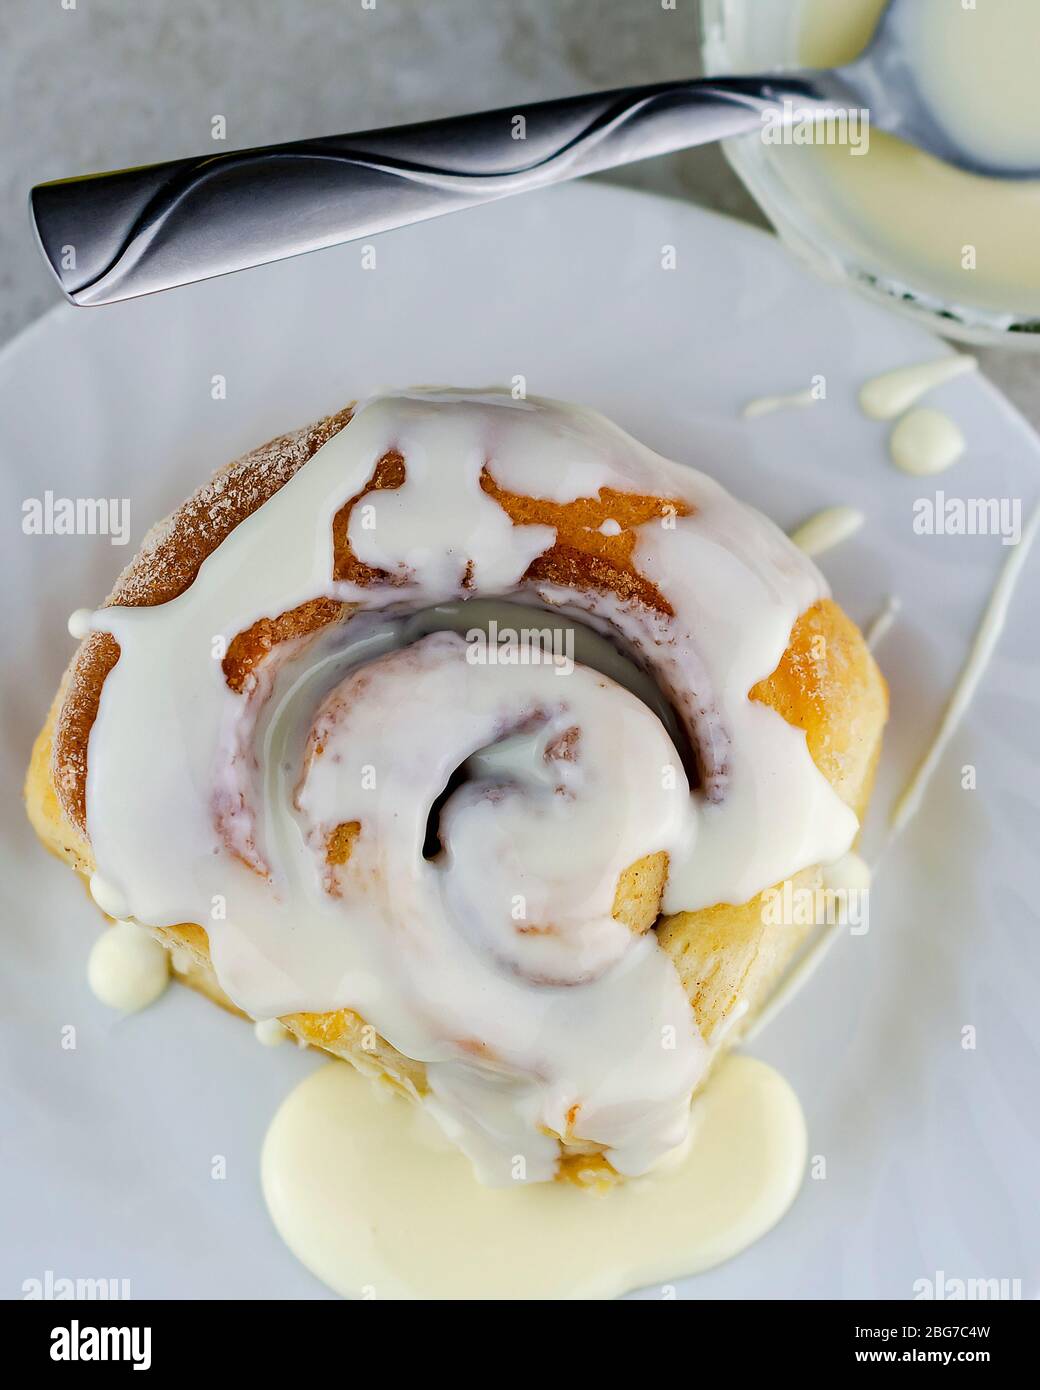 Overhead shot of a cinnamon roll on a white plate with a bowl of glaze. Stock Photo